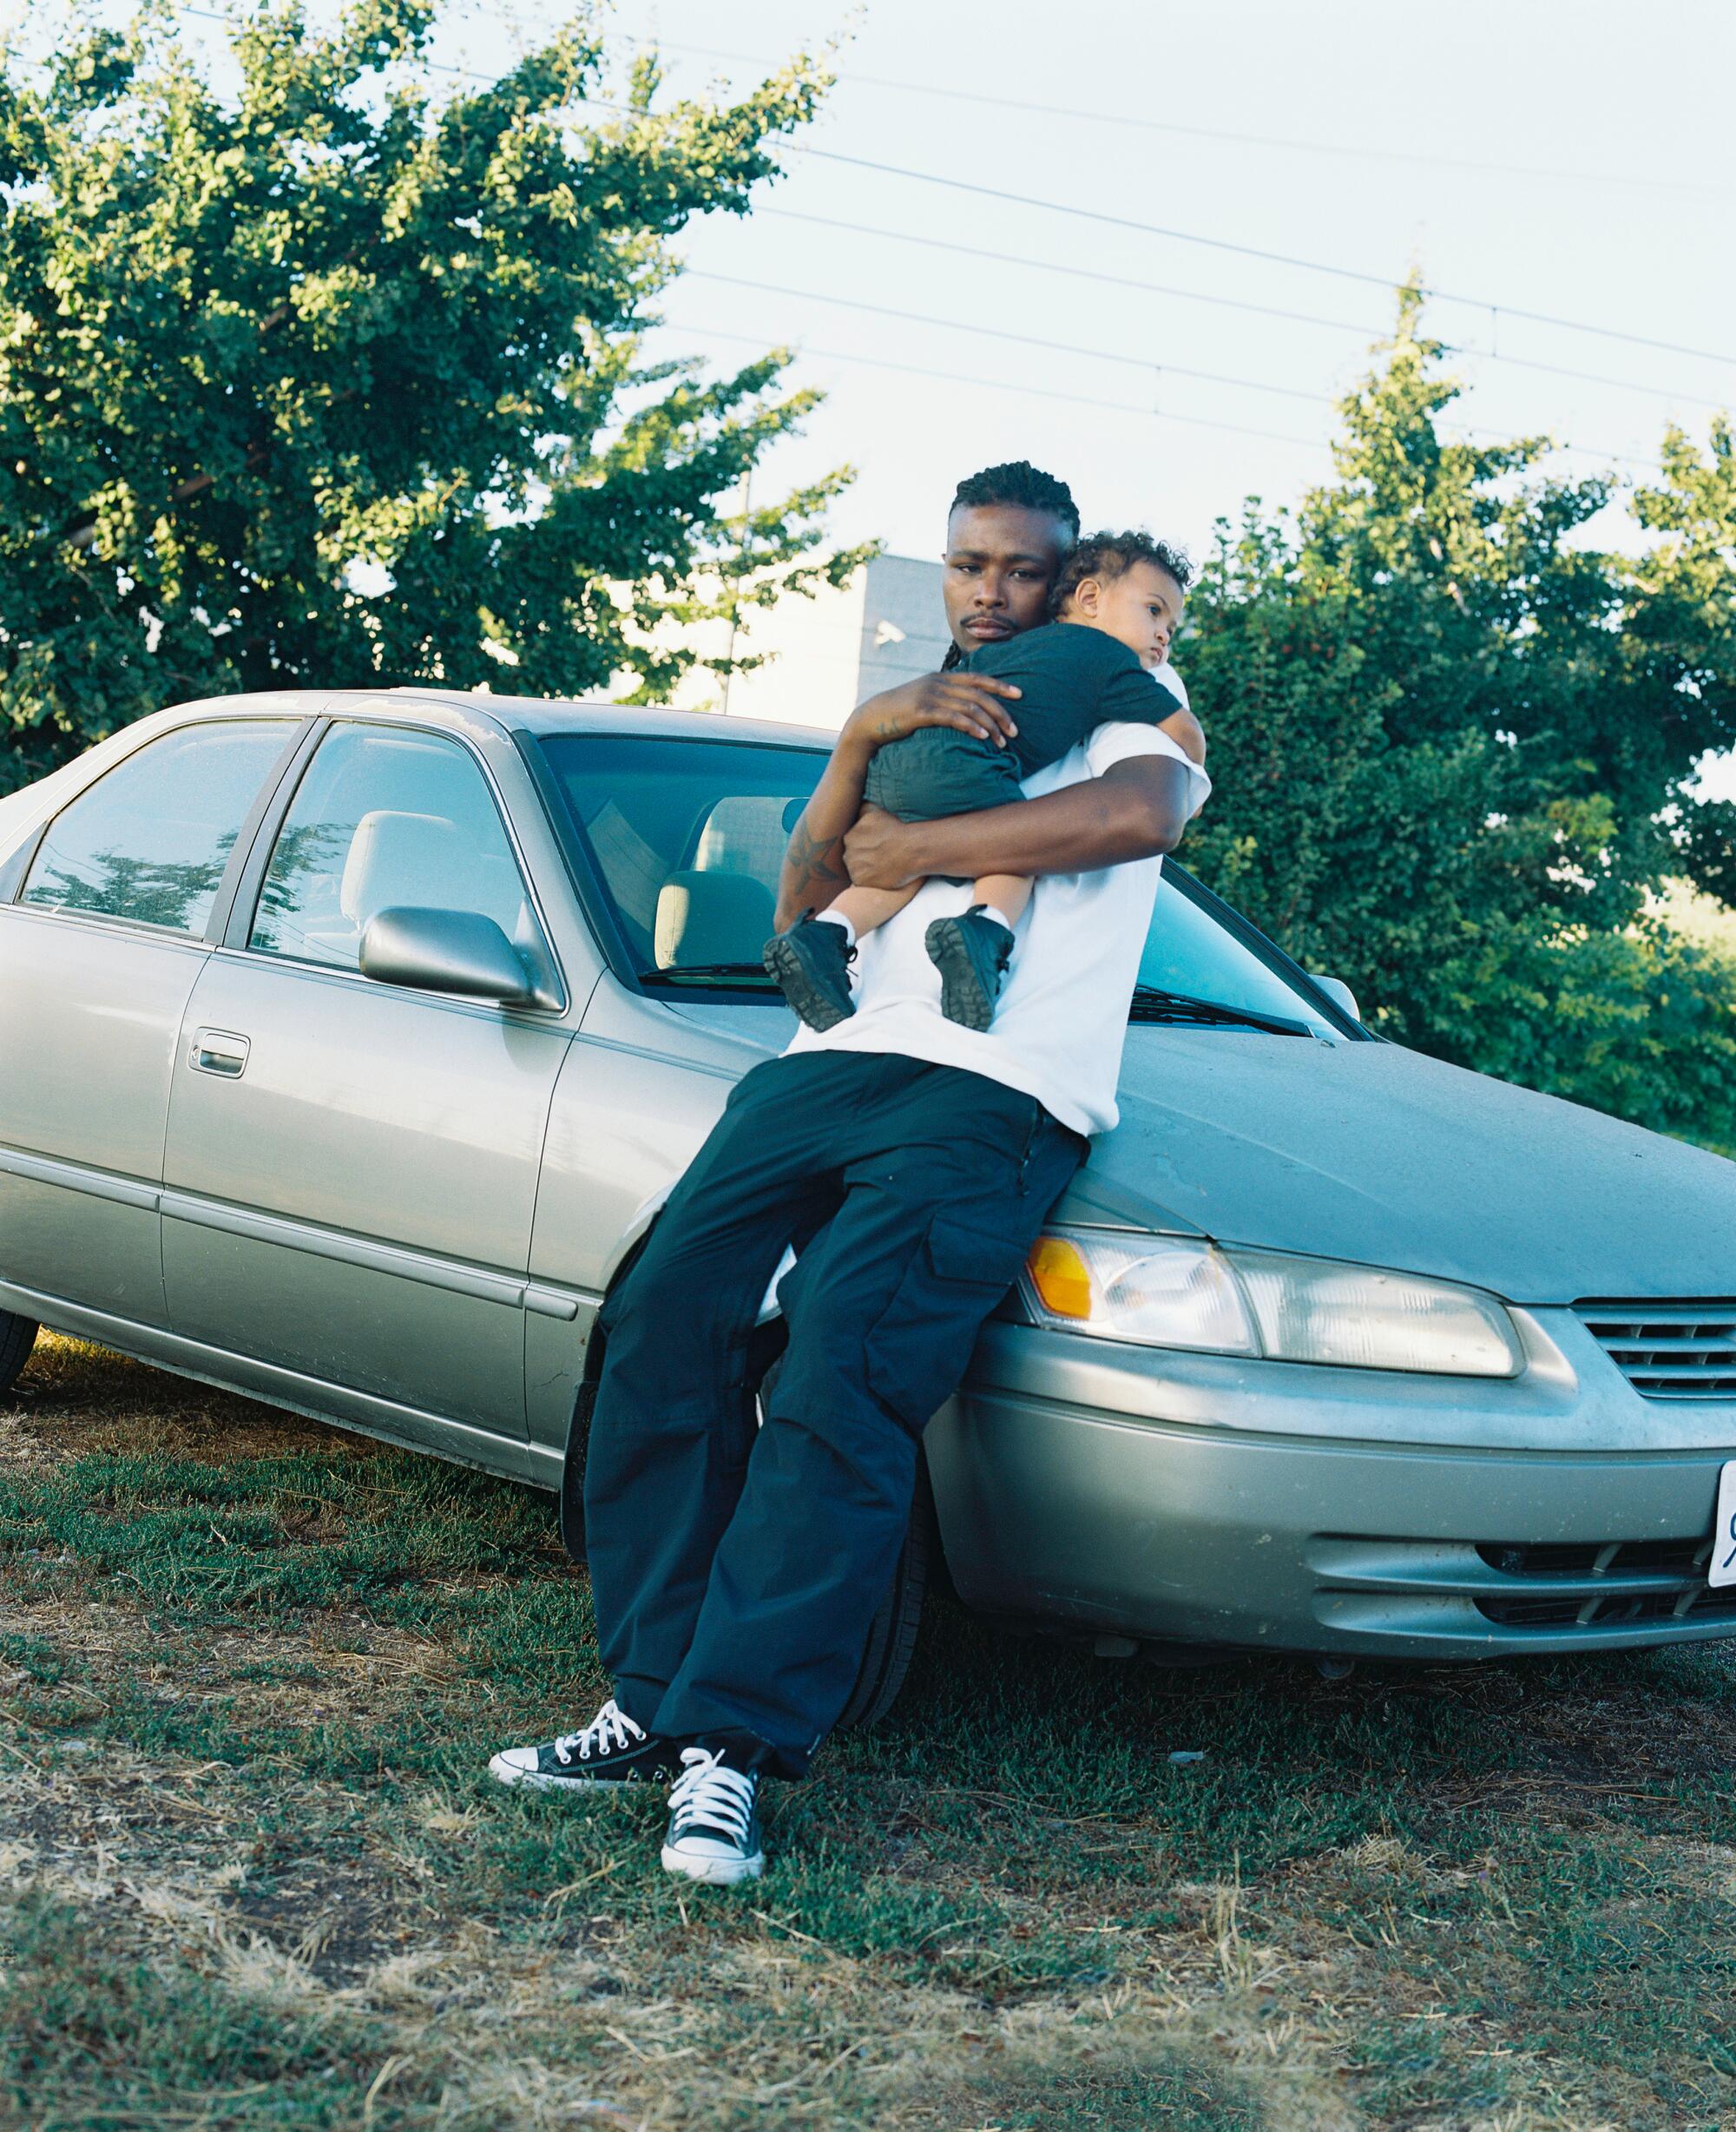 A man leans against a car, holding a baby in his arms.